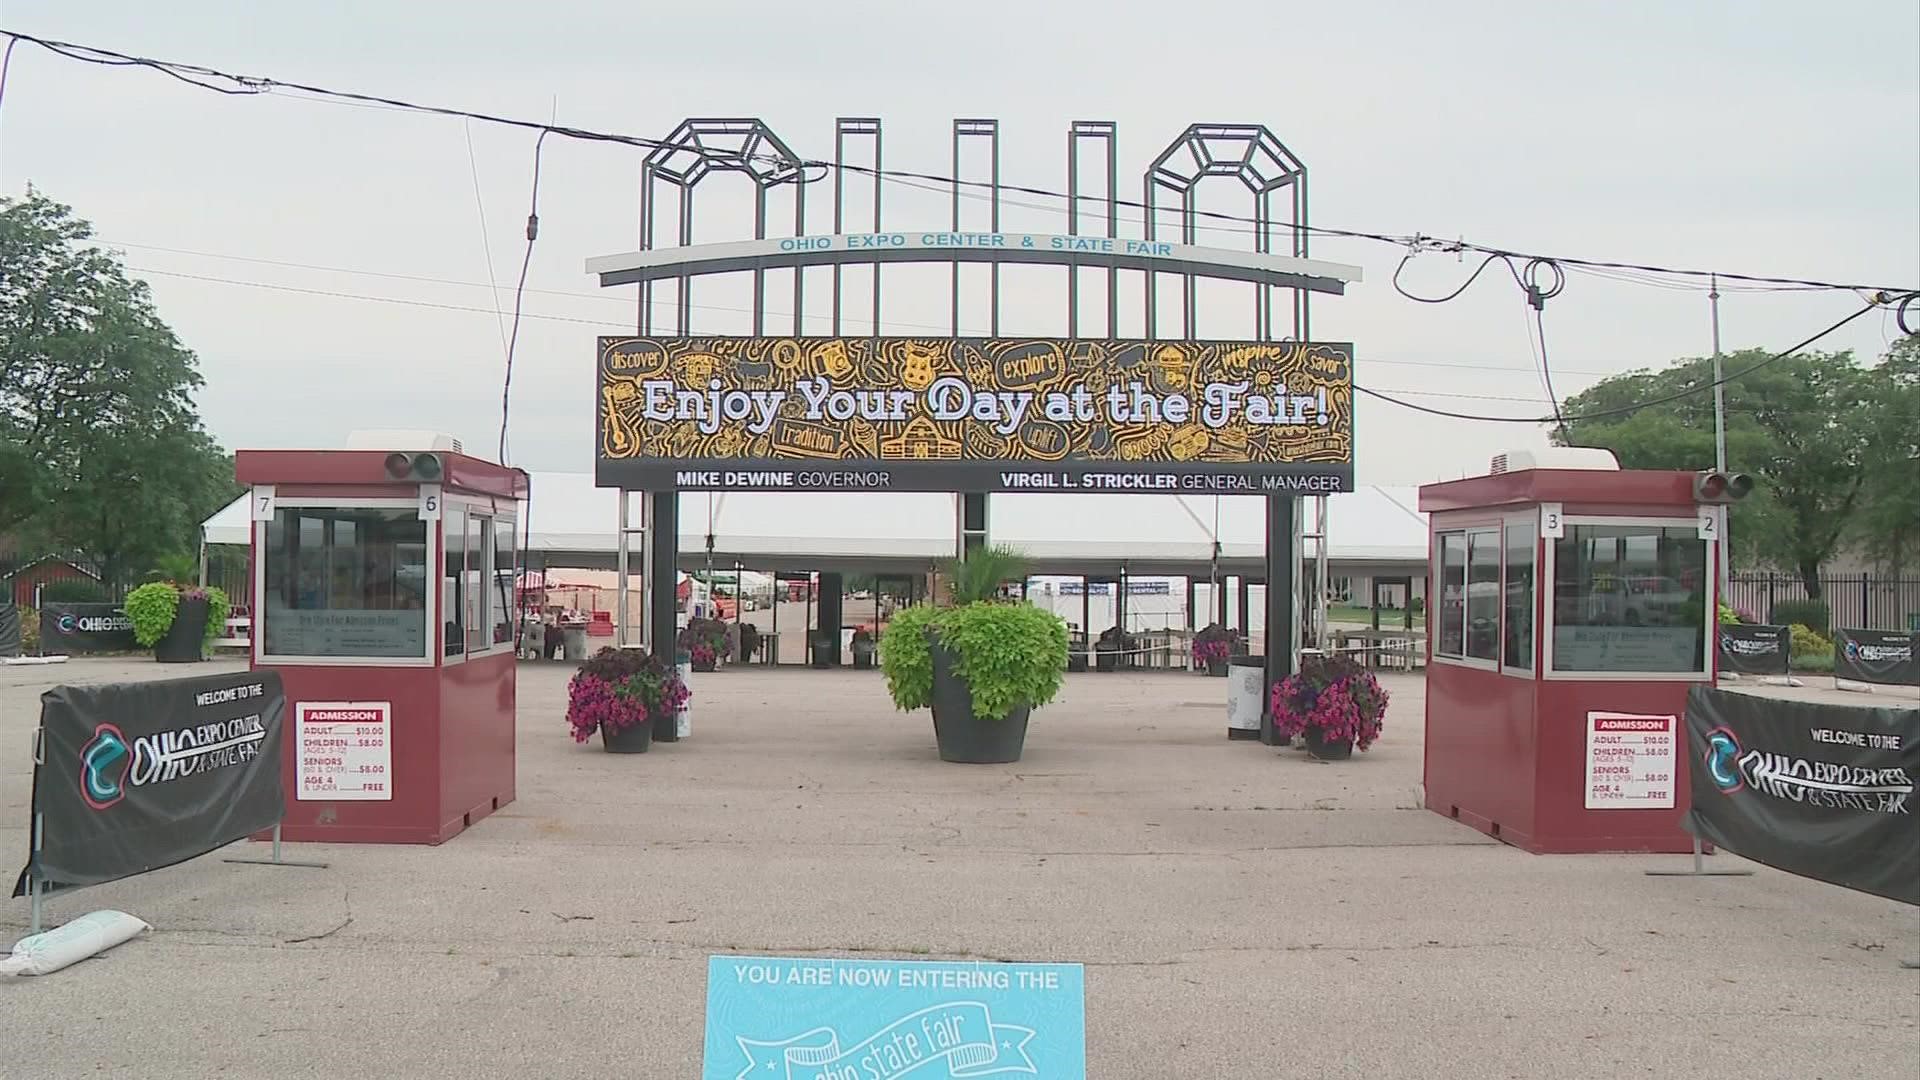 Wake Up CBUS is counting down to the start of the Ohio State Fair.